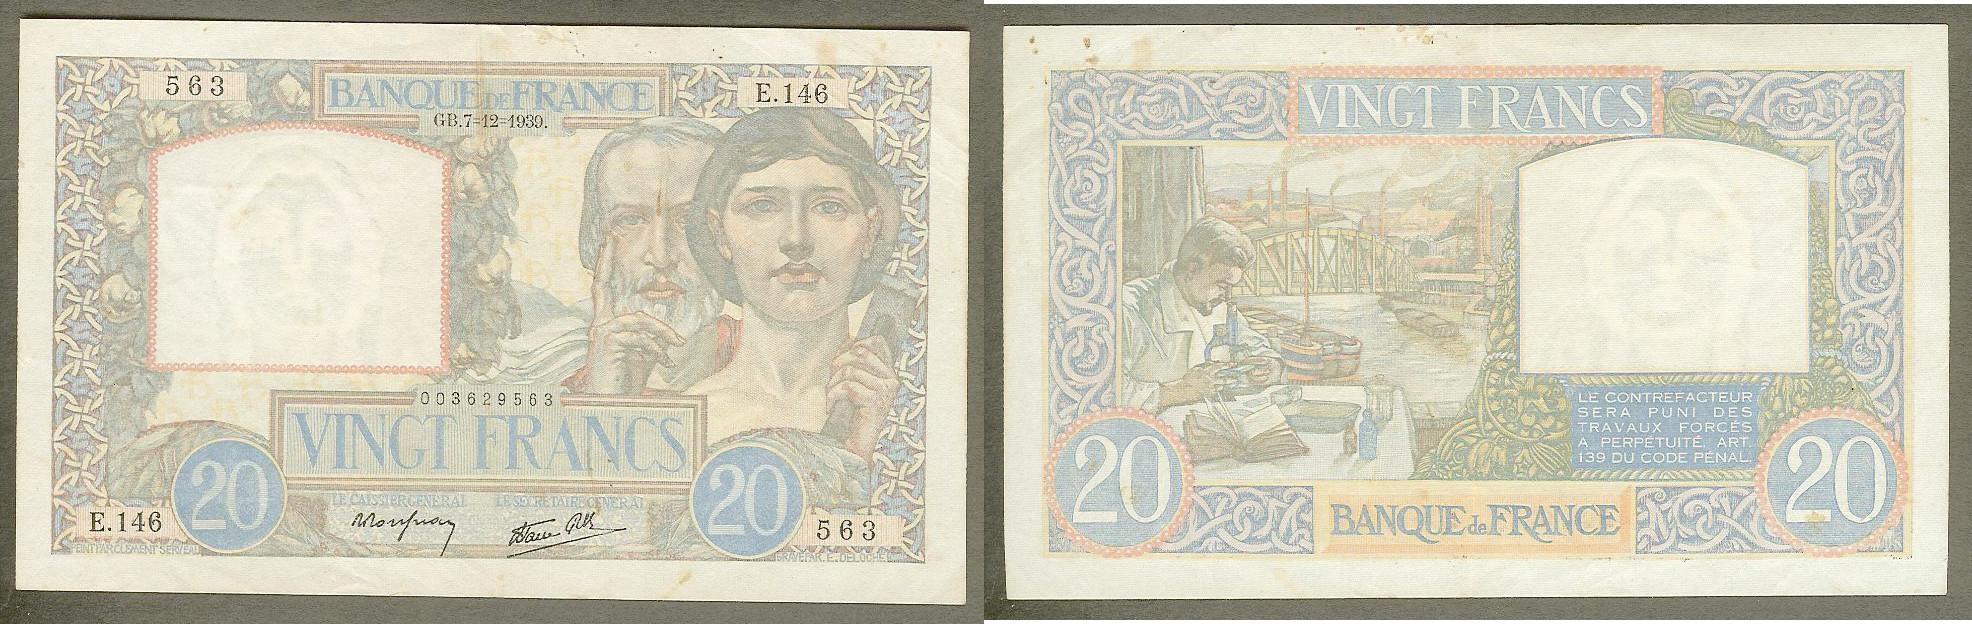 20 francs Science and Work 7.12.1939 VF+